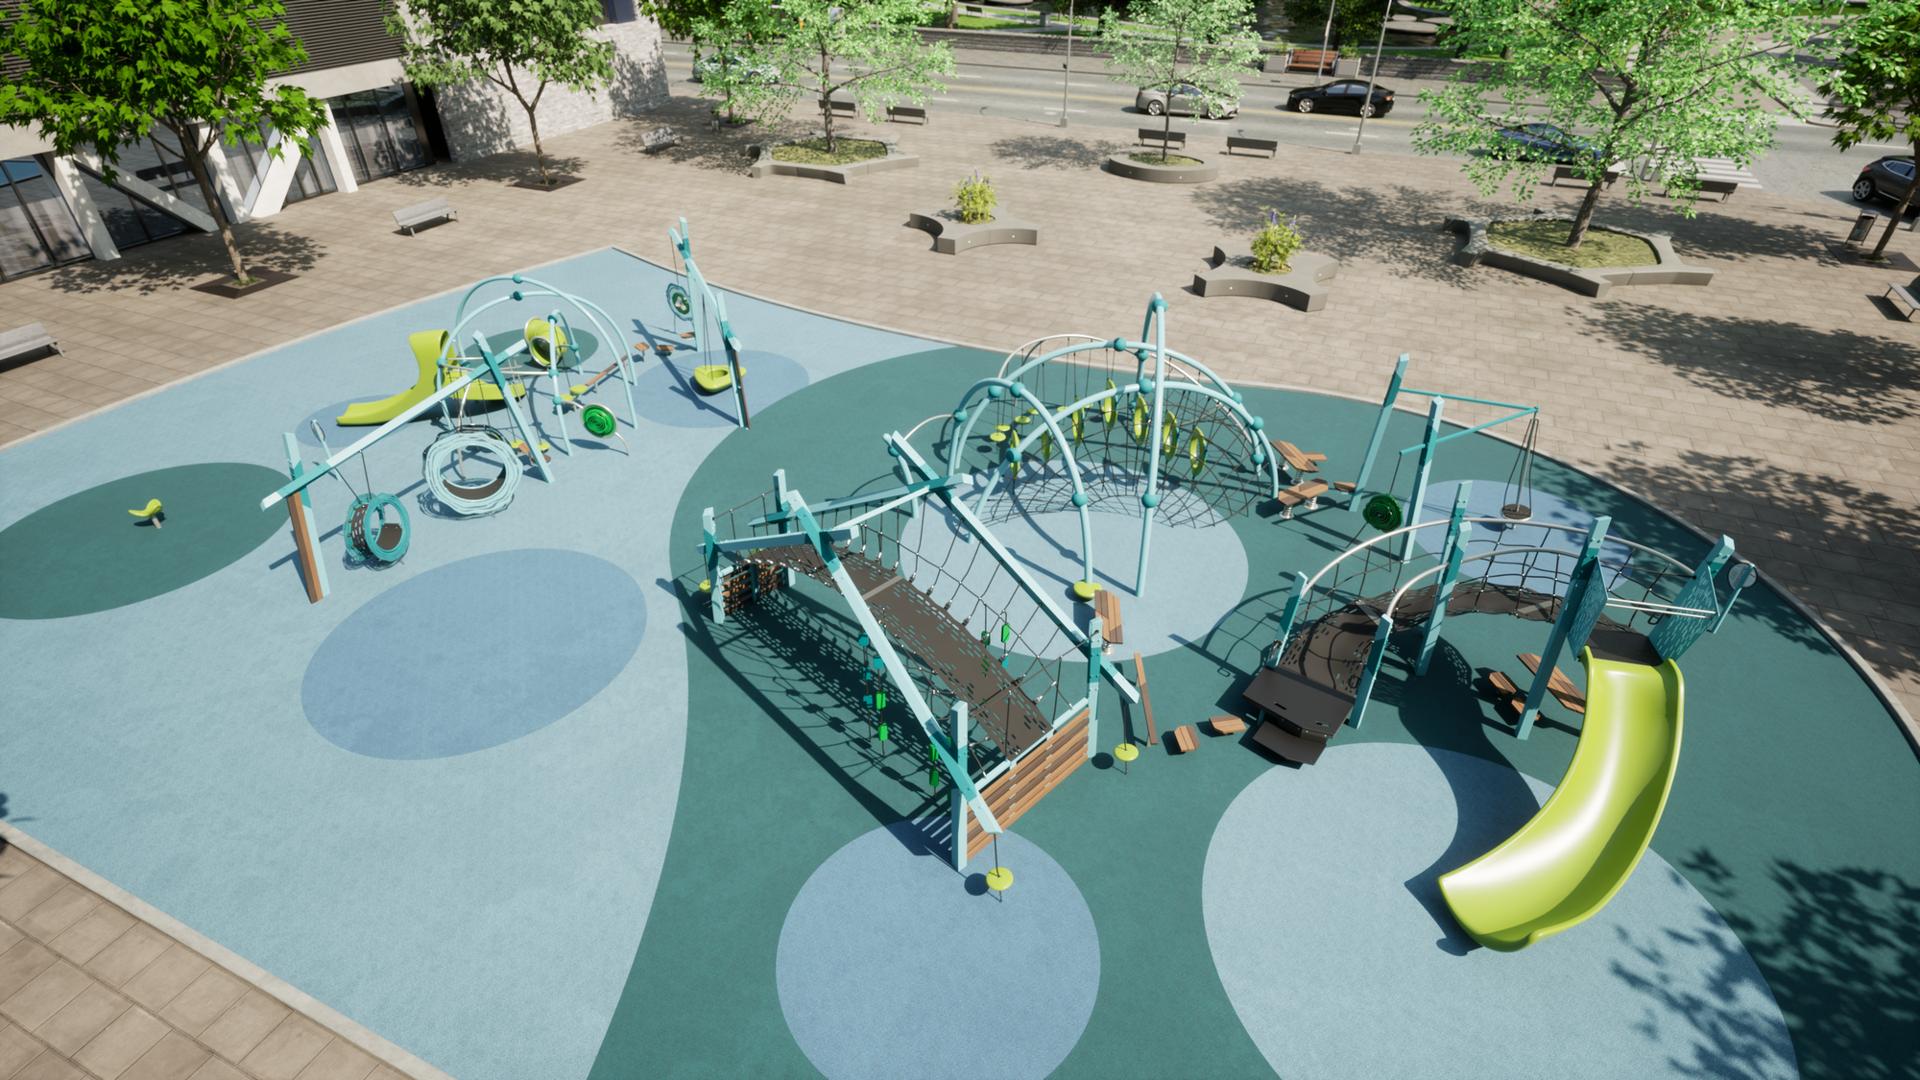 Animated rendering with an elevated view of a city courtyard with a play area with multiple modern designed play structures colored in light blue, teal, and lime green. The playground surfacing is designed with different size and varying colored circles.